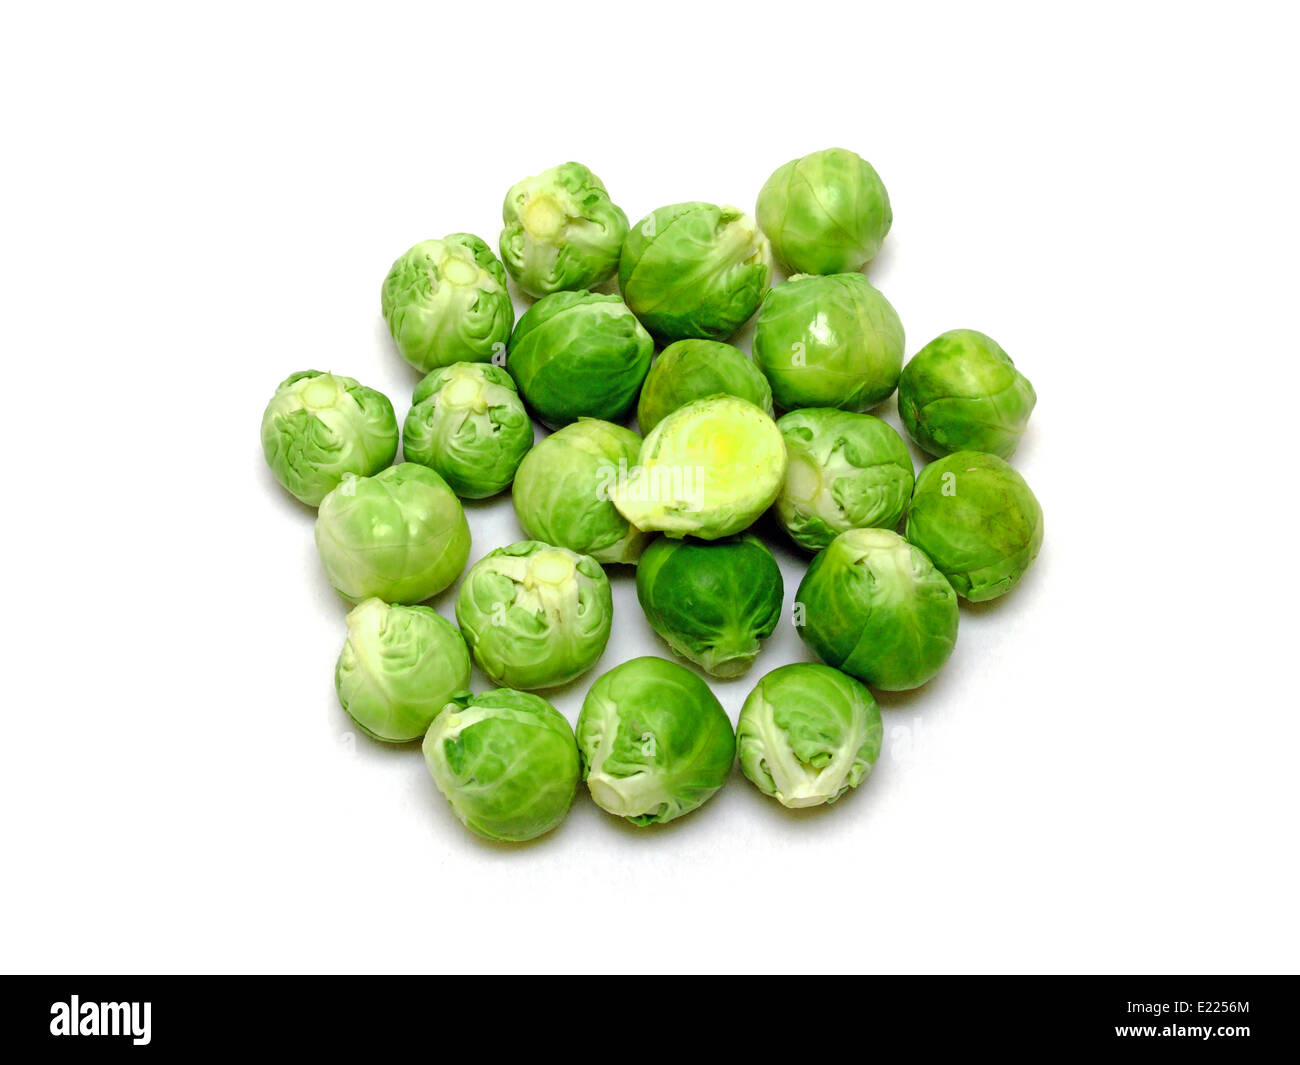 brussels sprouts Stock Photo